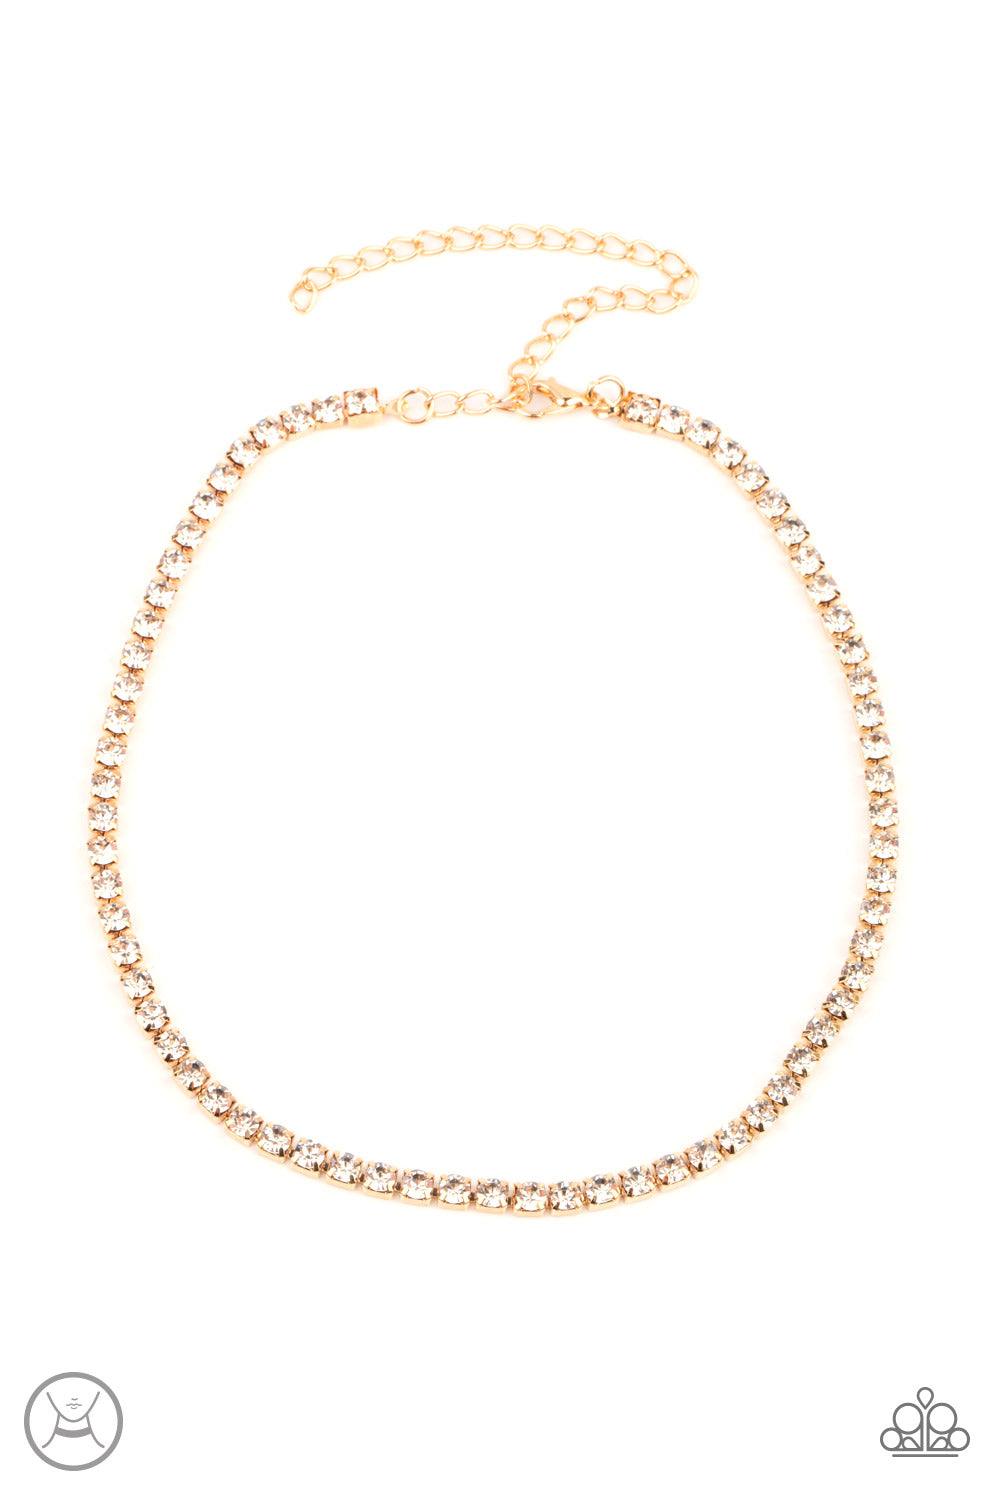 Paparazzi Accessories Starlight Radiance - Gold A strand of brilliant white rhinestones set in classic gold fittings creates a stunningly radiant display across the collar. Features an adjustable clasp closure. Sold as one individual choker necklace. Incl